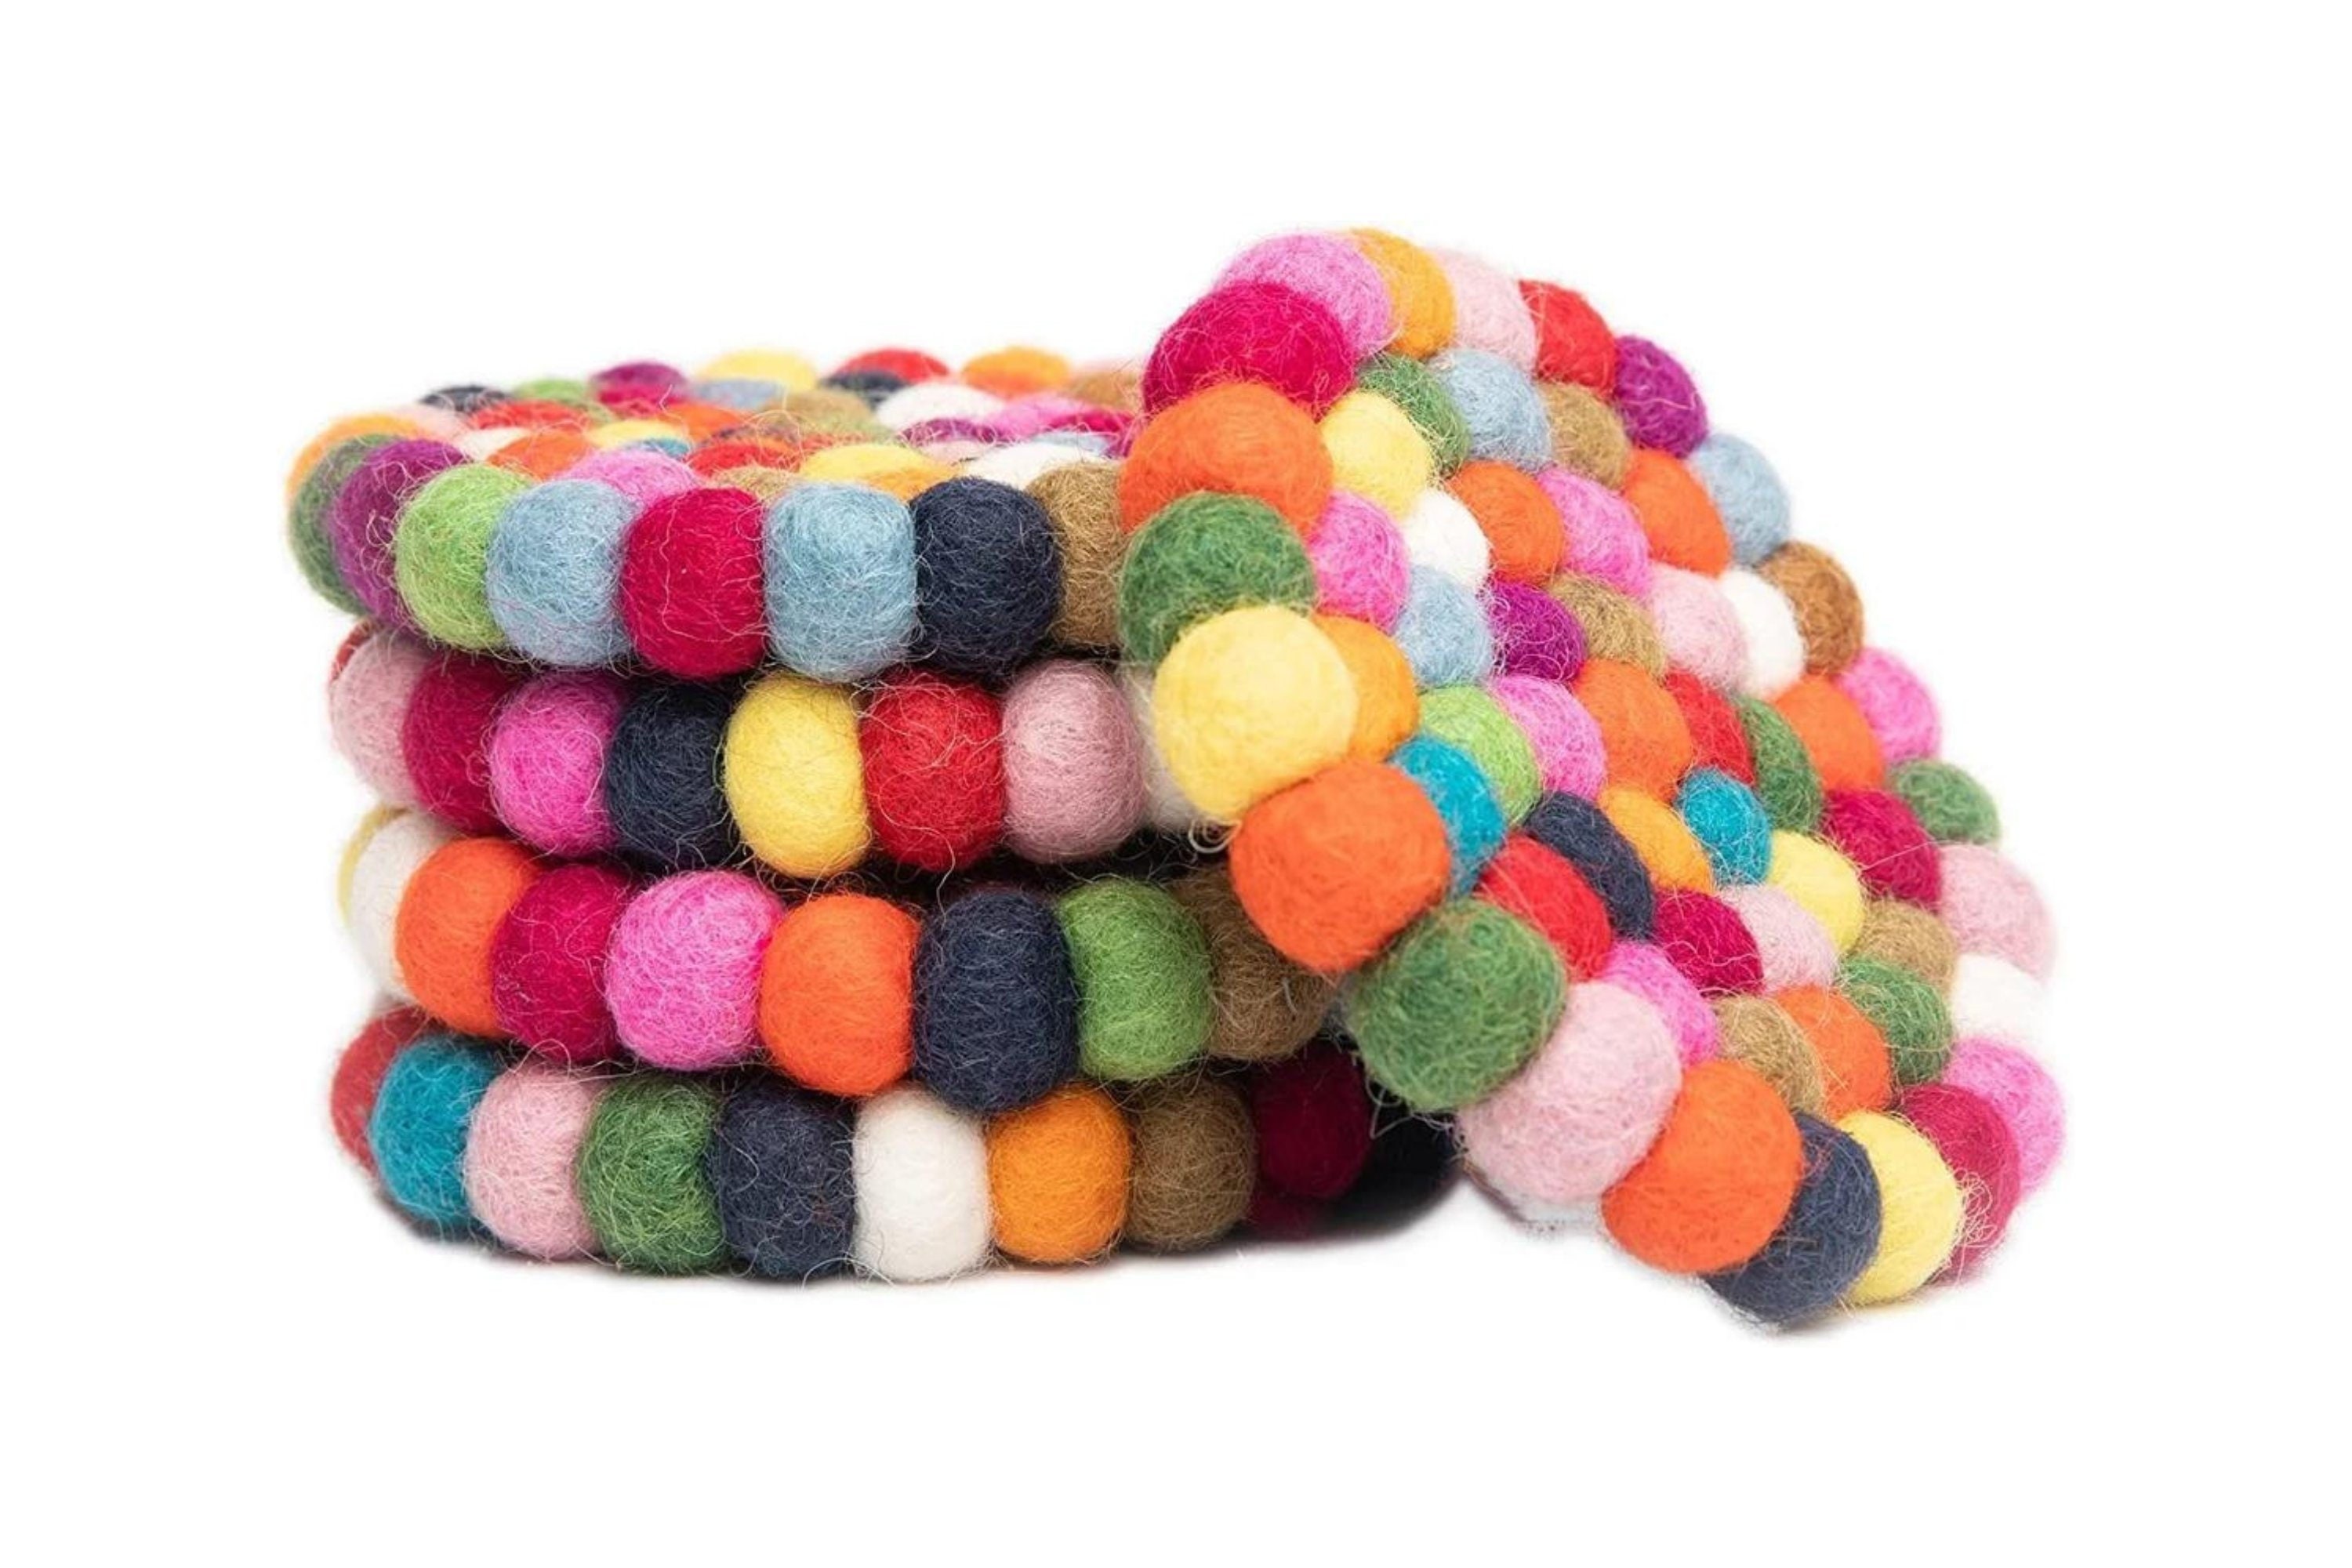 Round Felt Coasters Multi-color Set of 5 100% Merino Wool Water-wicking,  Stain-resistant, Absorbent 